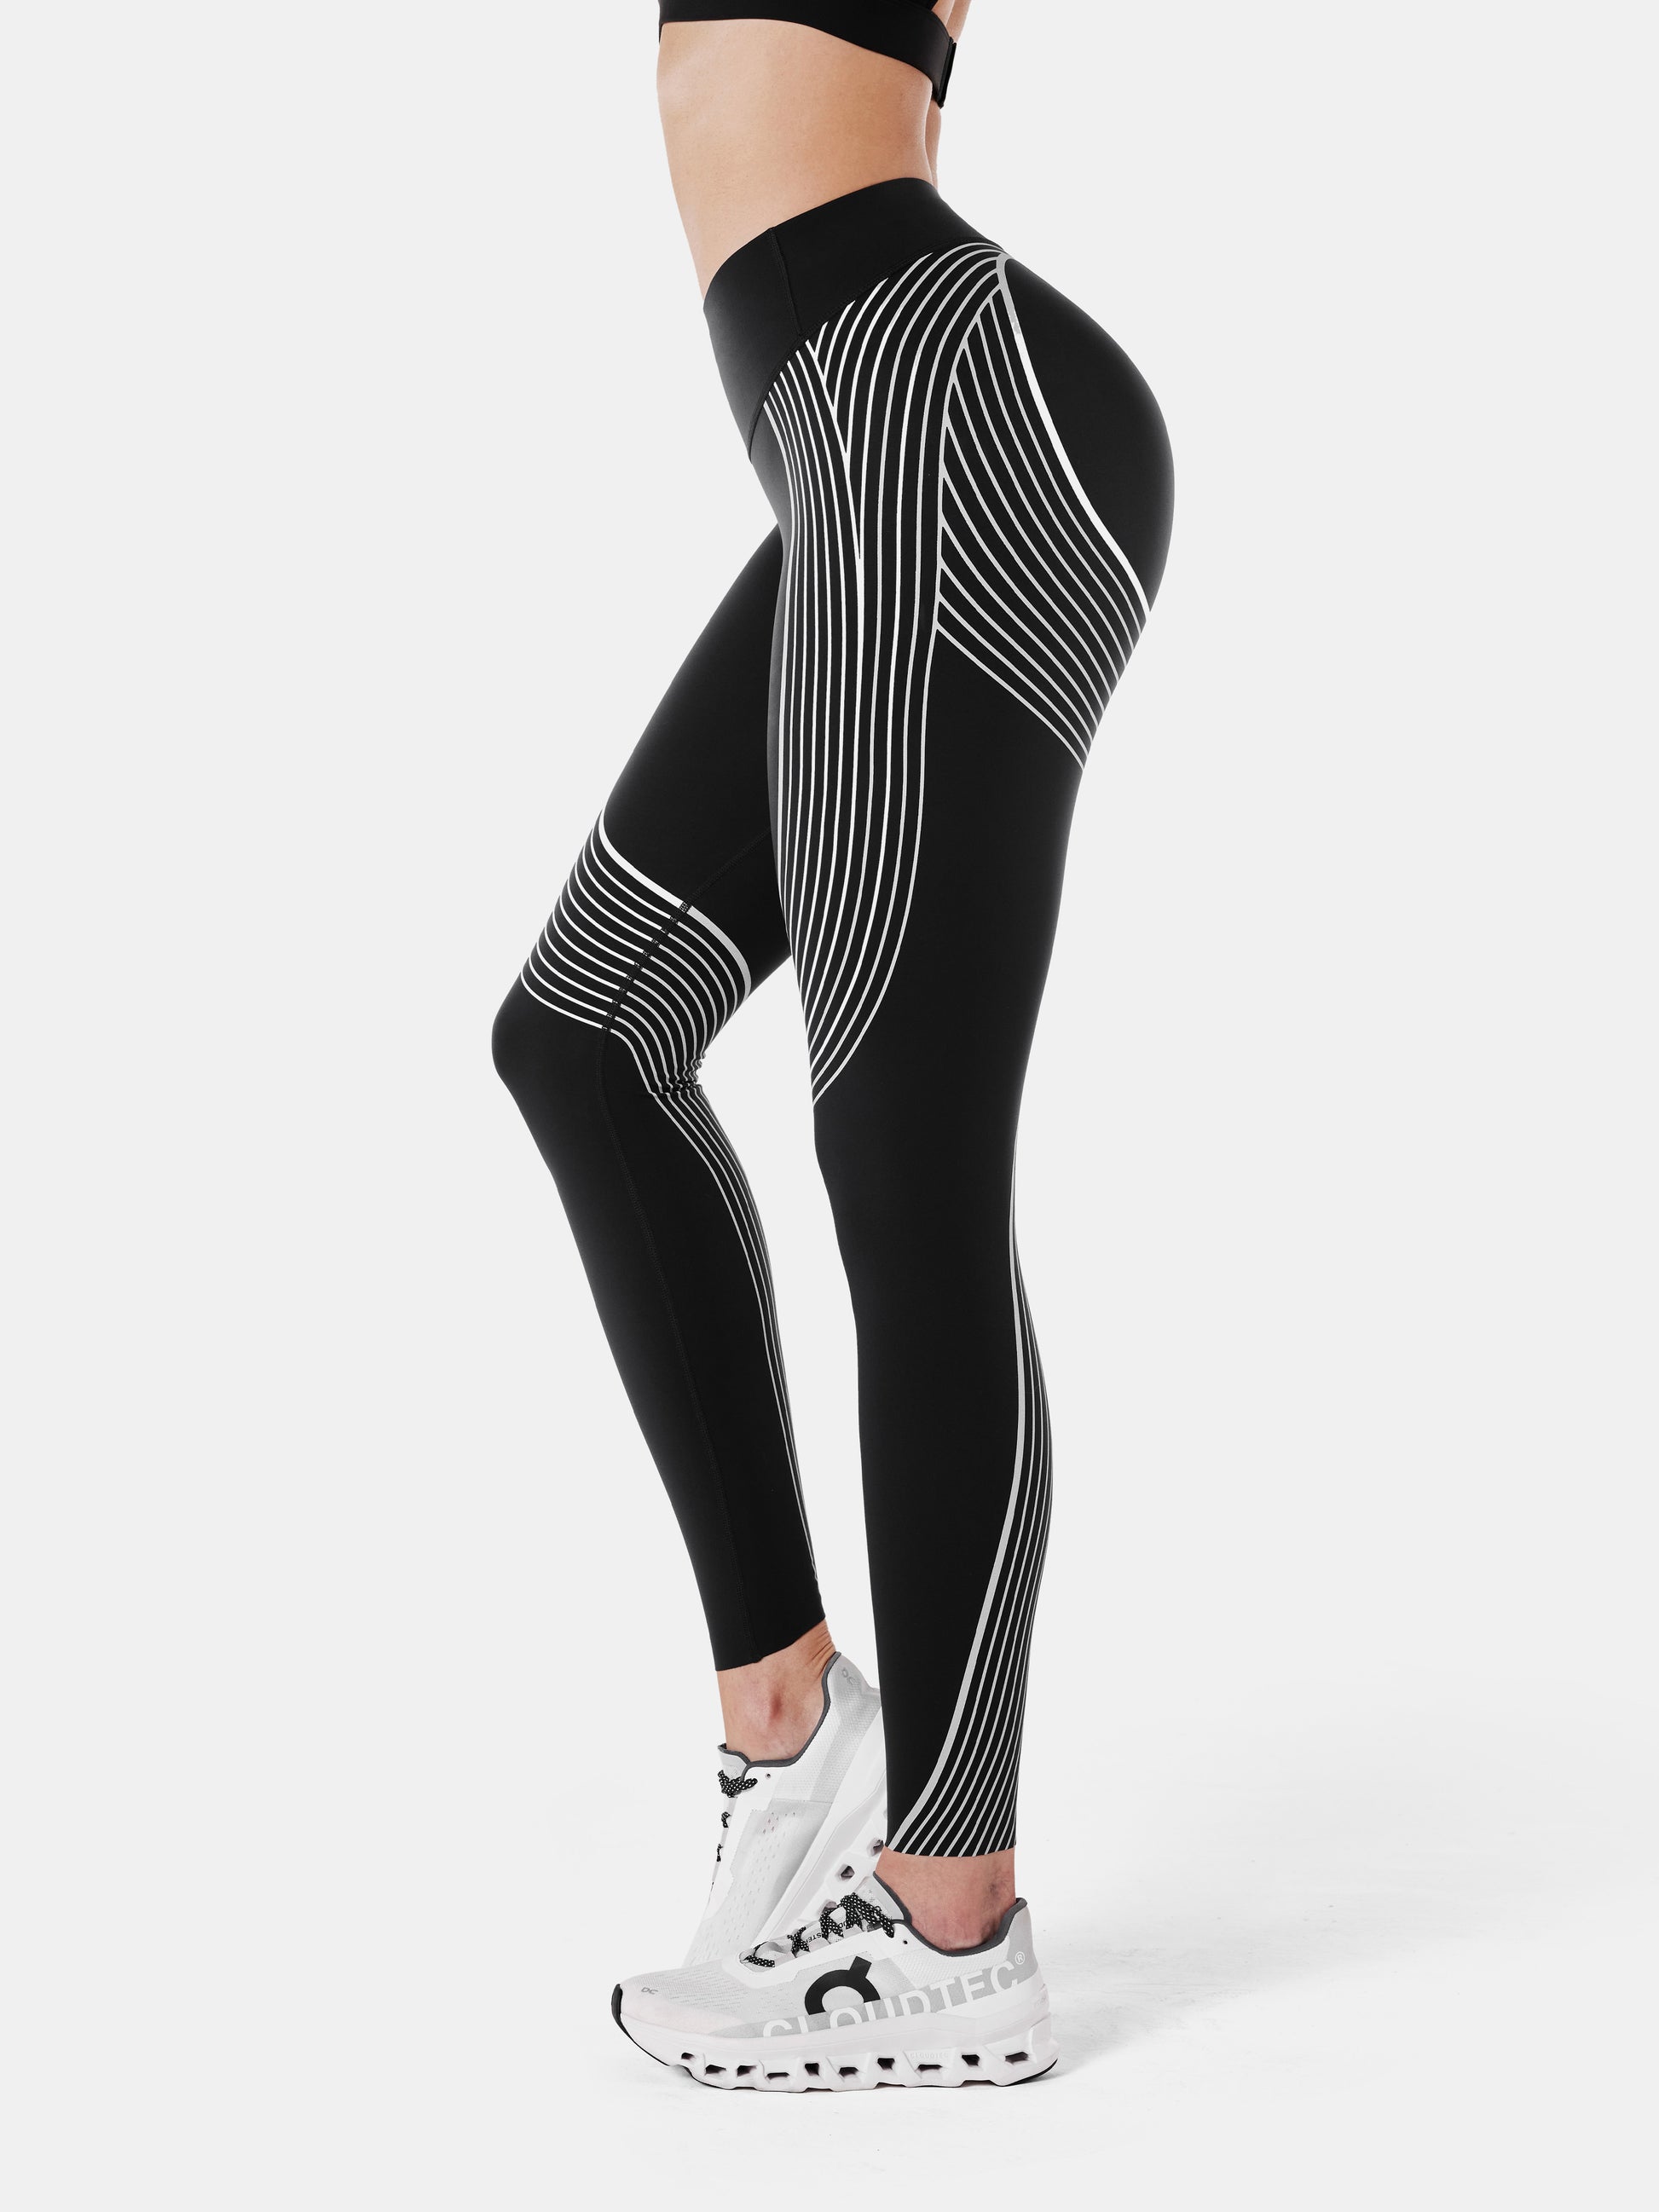 High waisted mesh breathable leggings with reflective logo and